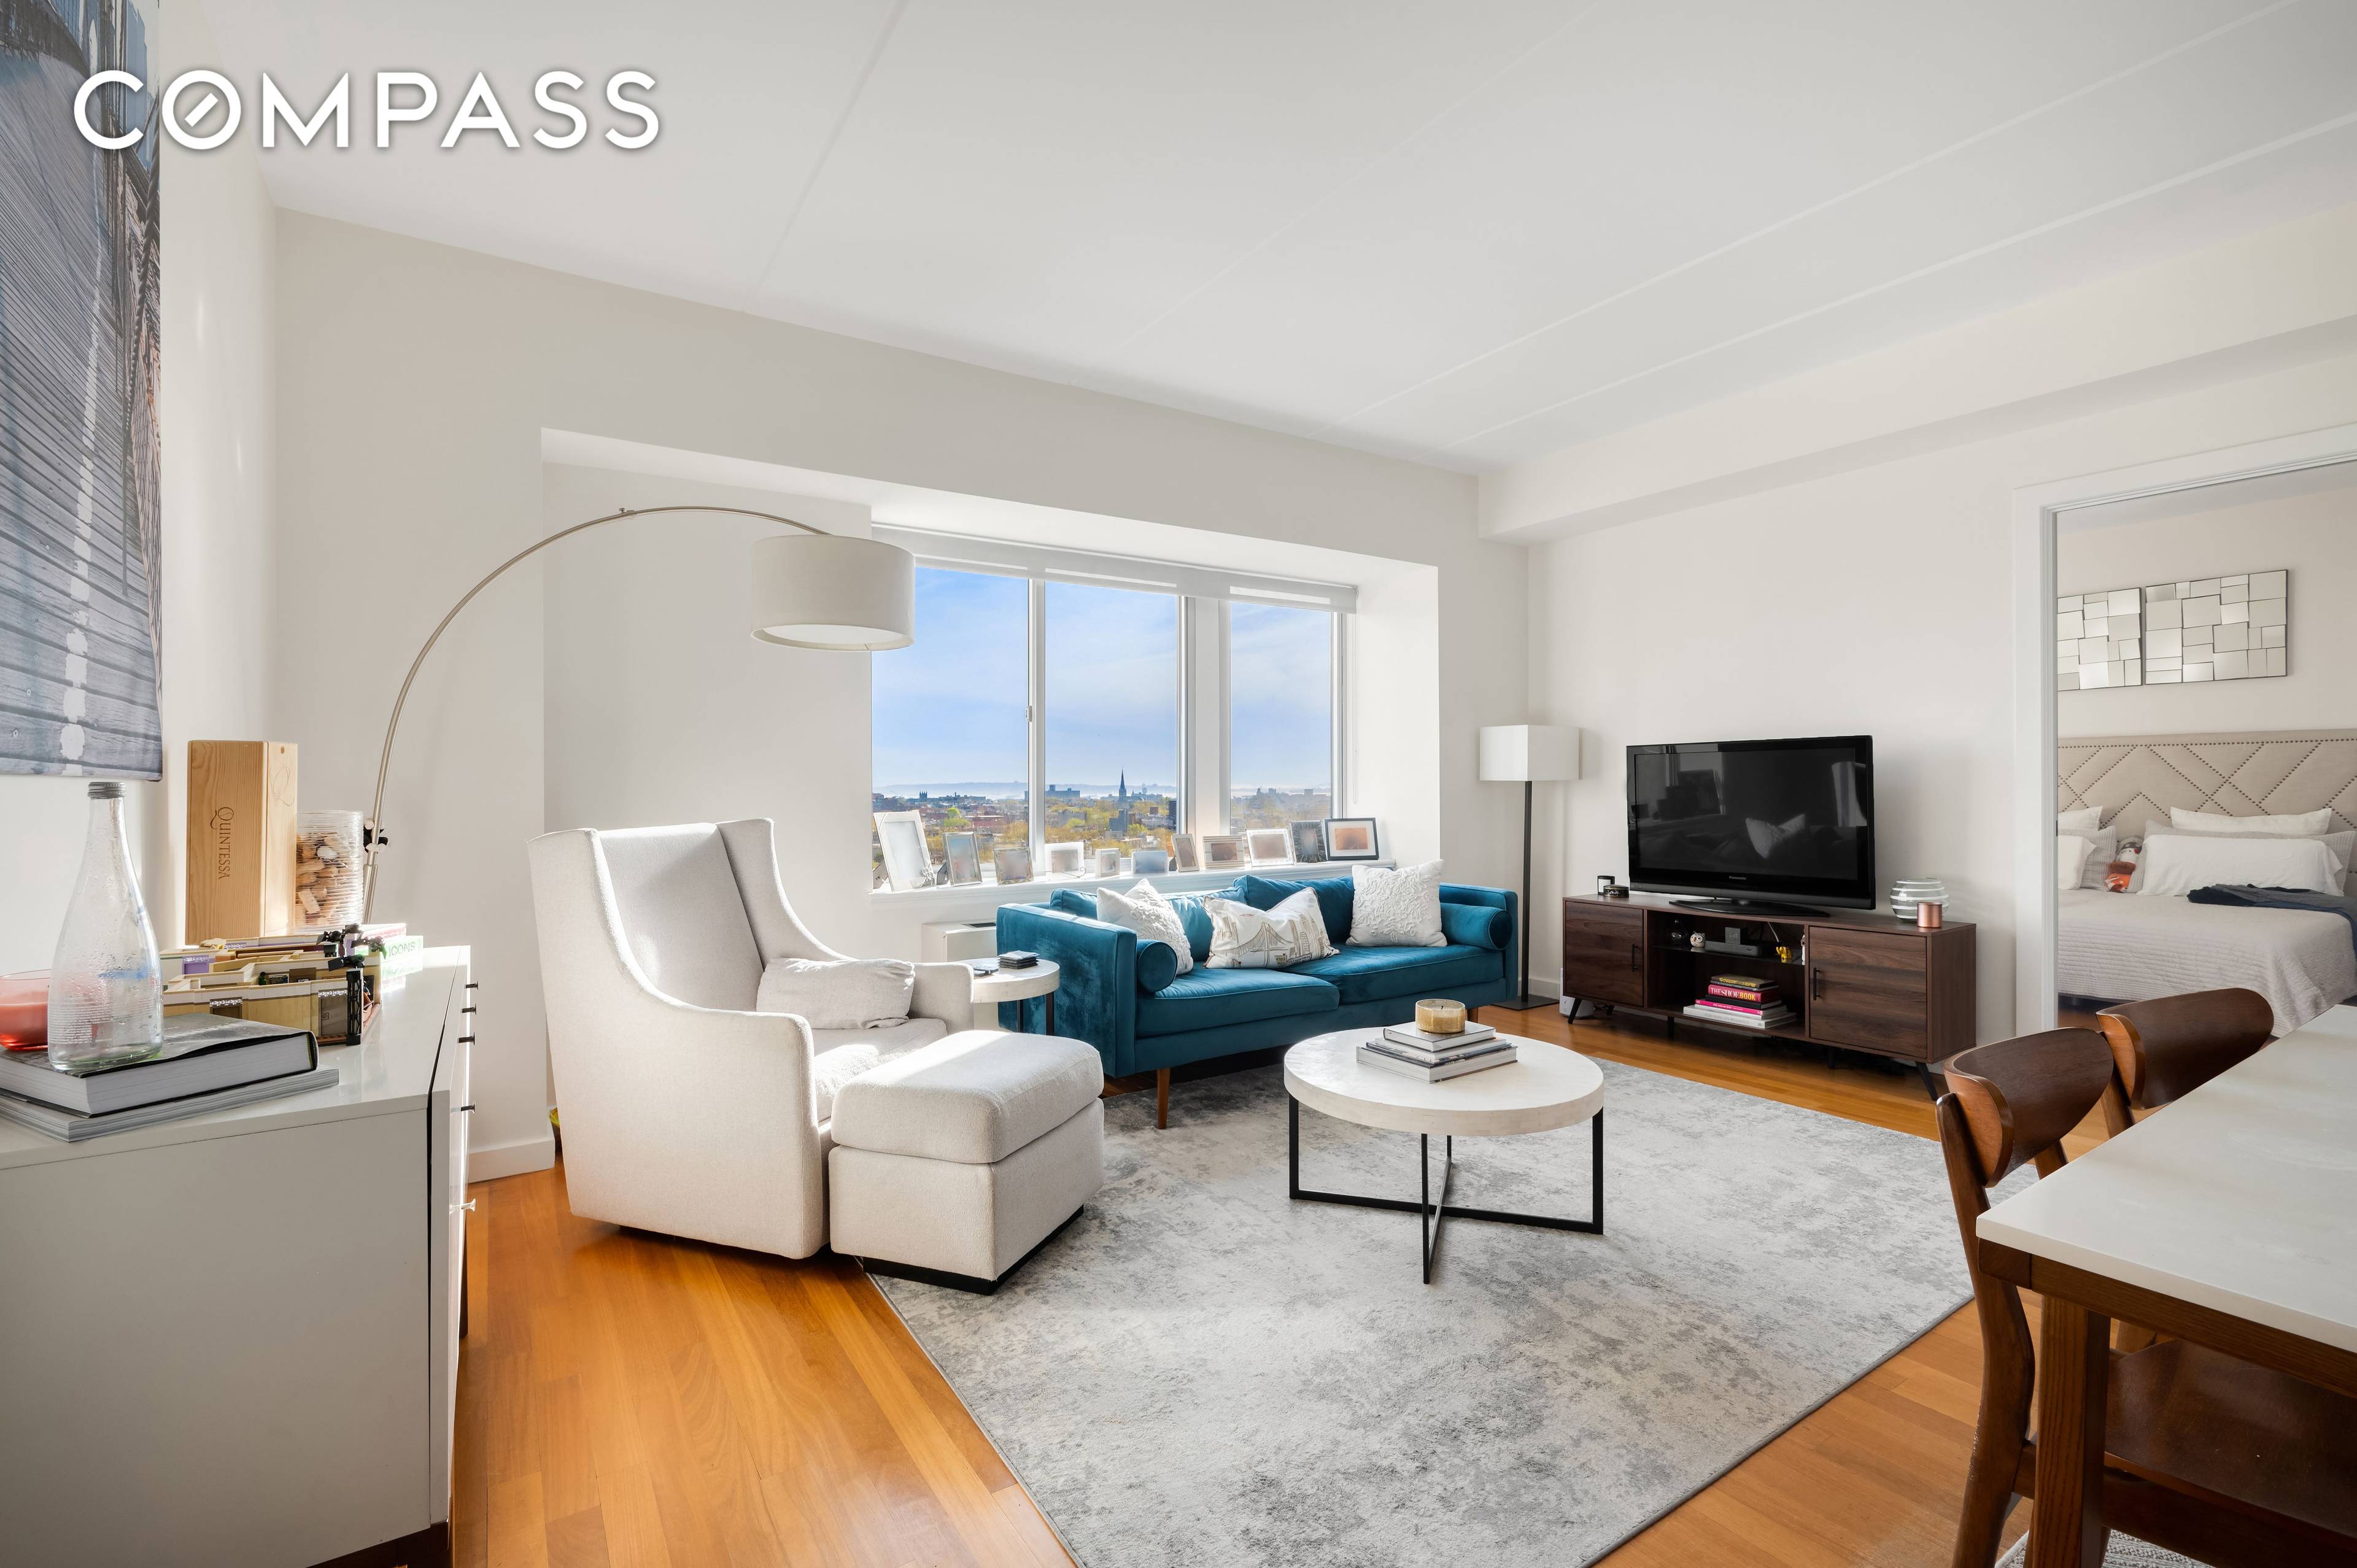 Experience breathtaking views of brownstone Brooklyn and the Verrazano Bridge from this stunning, high floor corner two bedroom two bathroom condo.